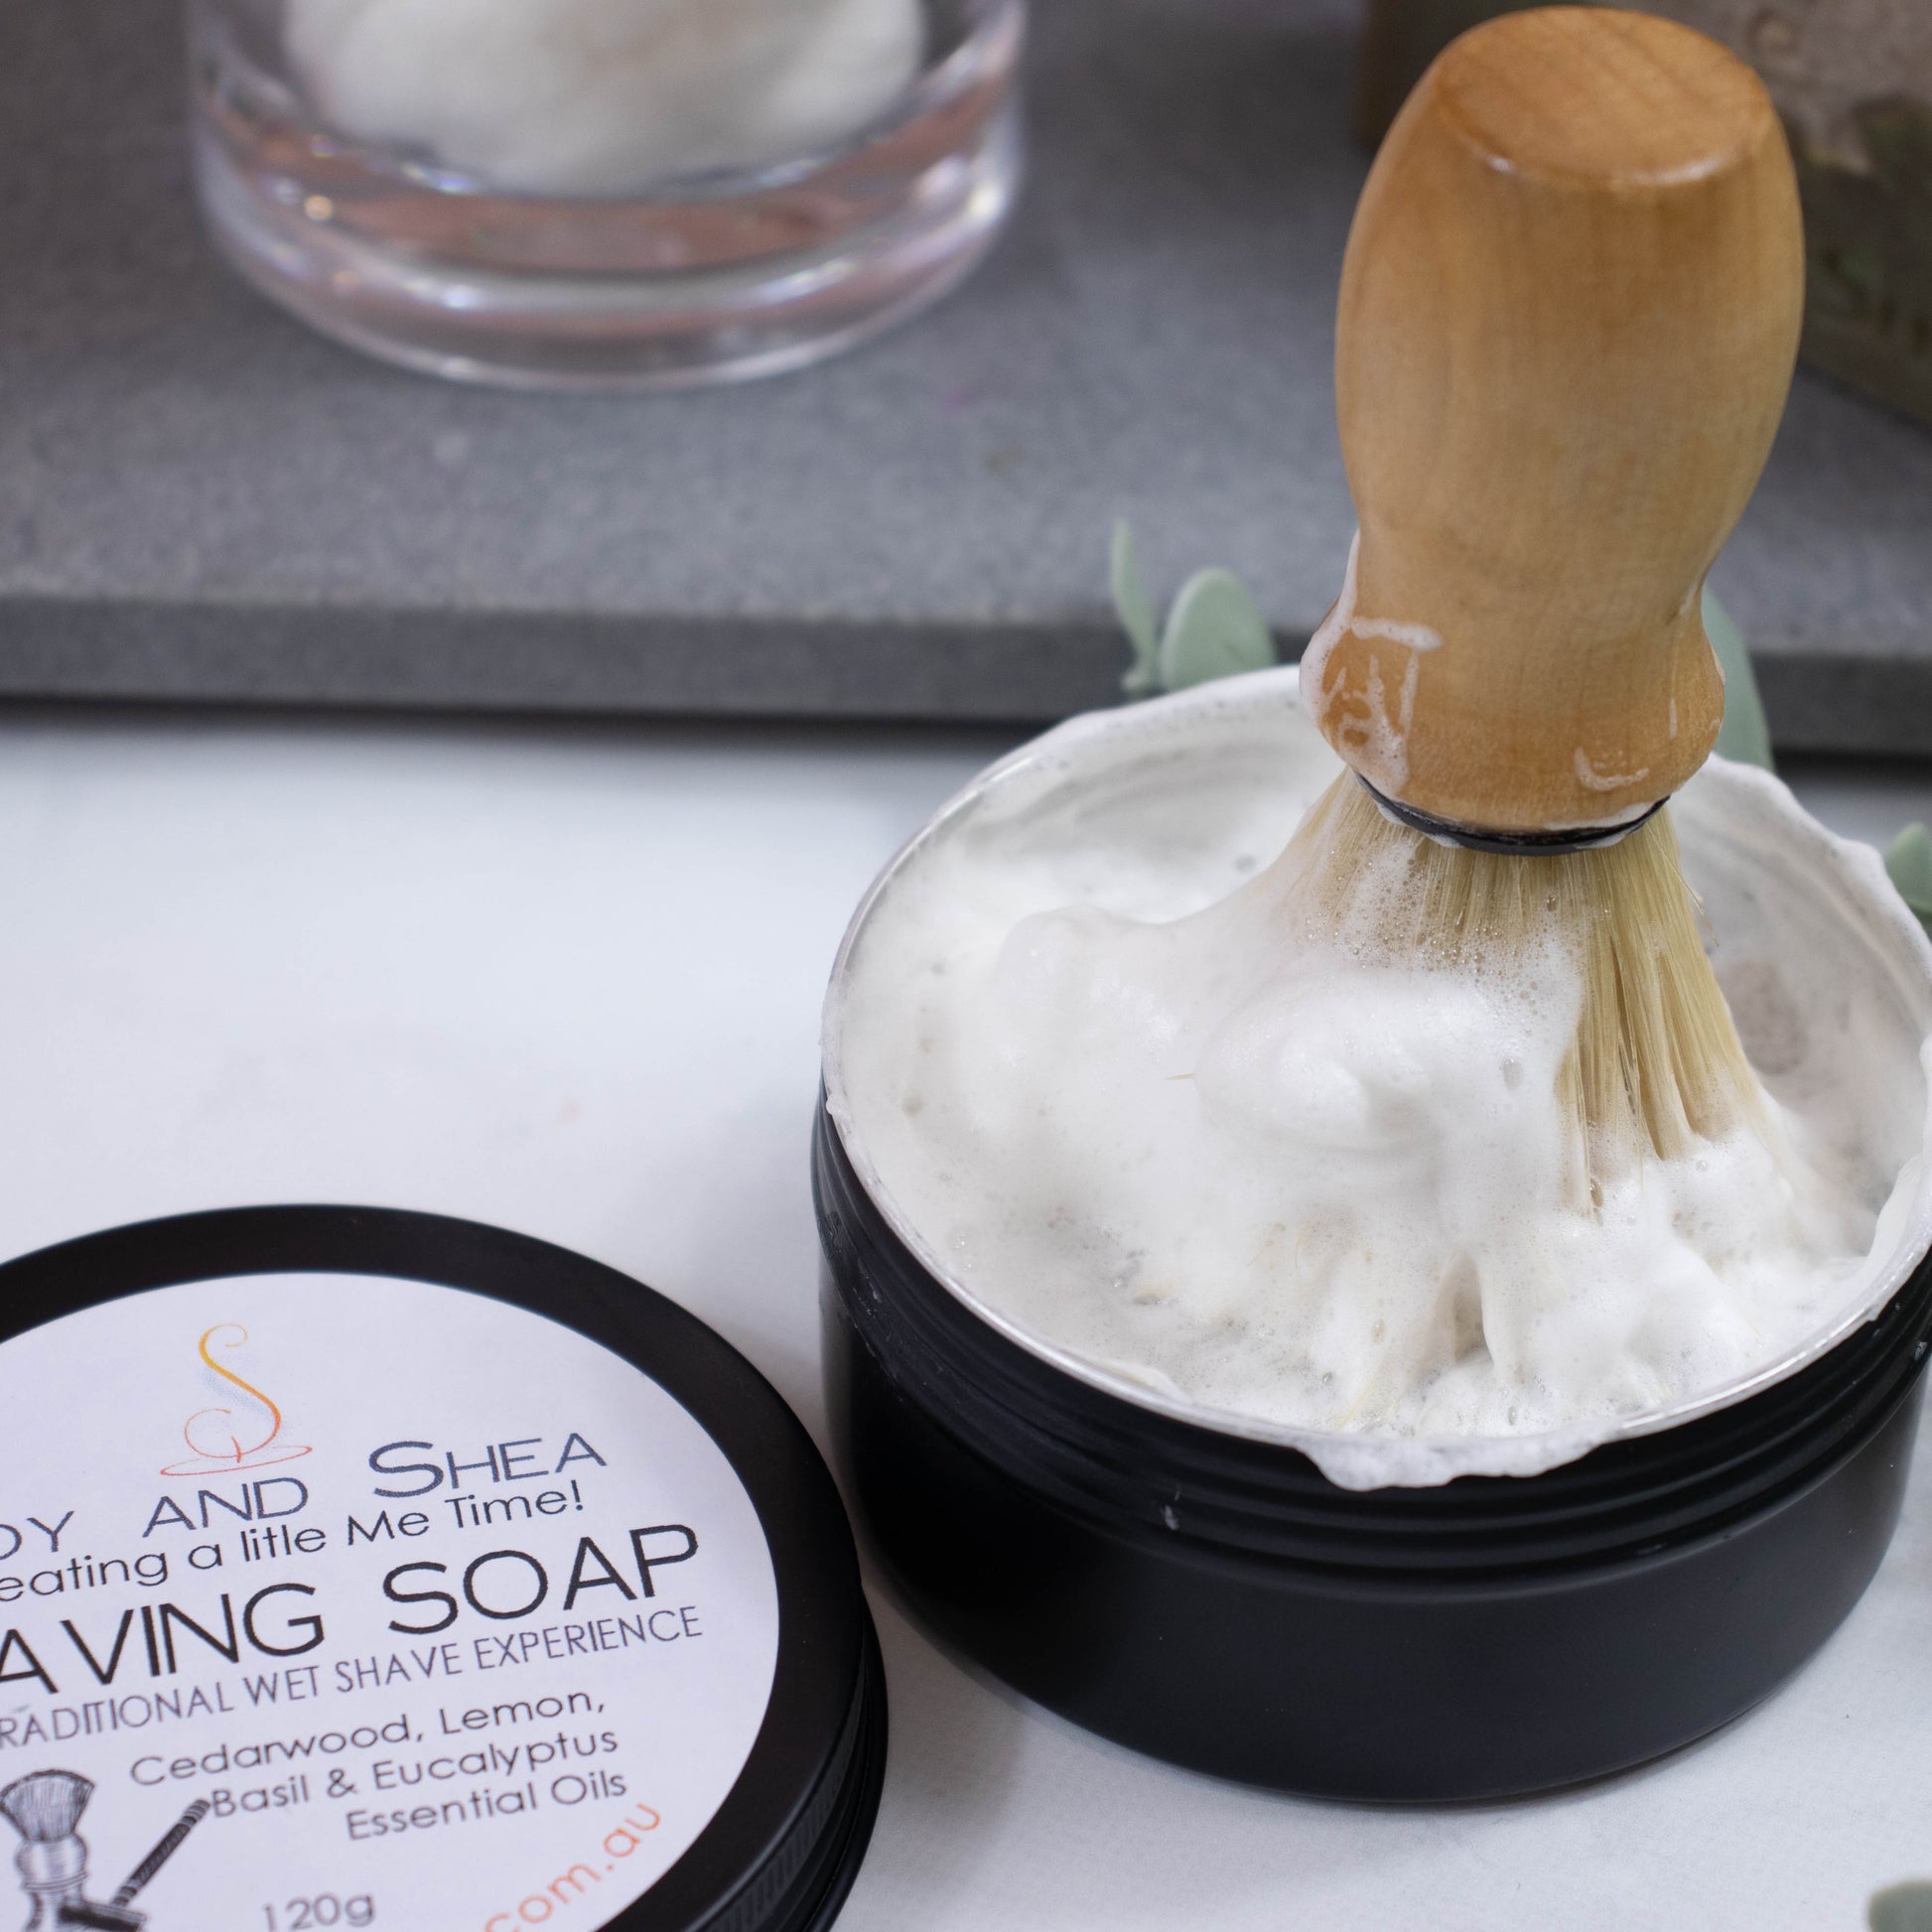 A pot of Shaving soap sits on the bench which has creamy lather. In the pot is a wooden handled shaving brush with foam over the bristles